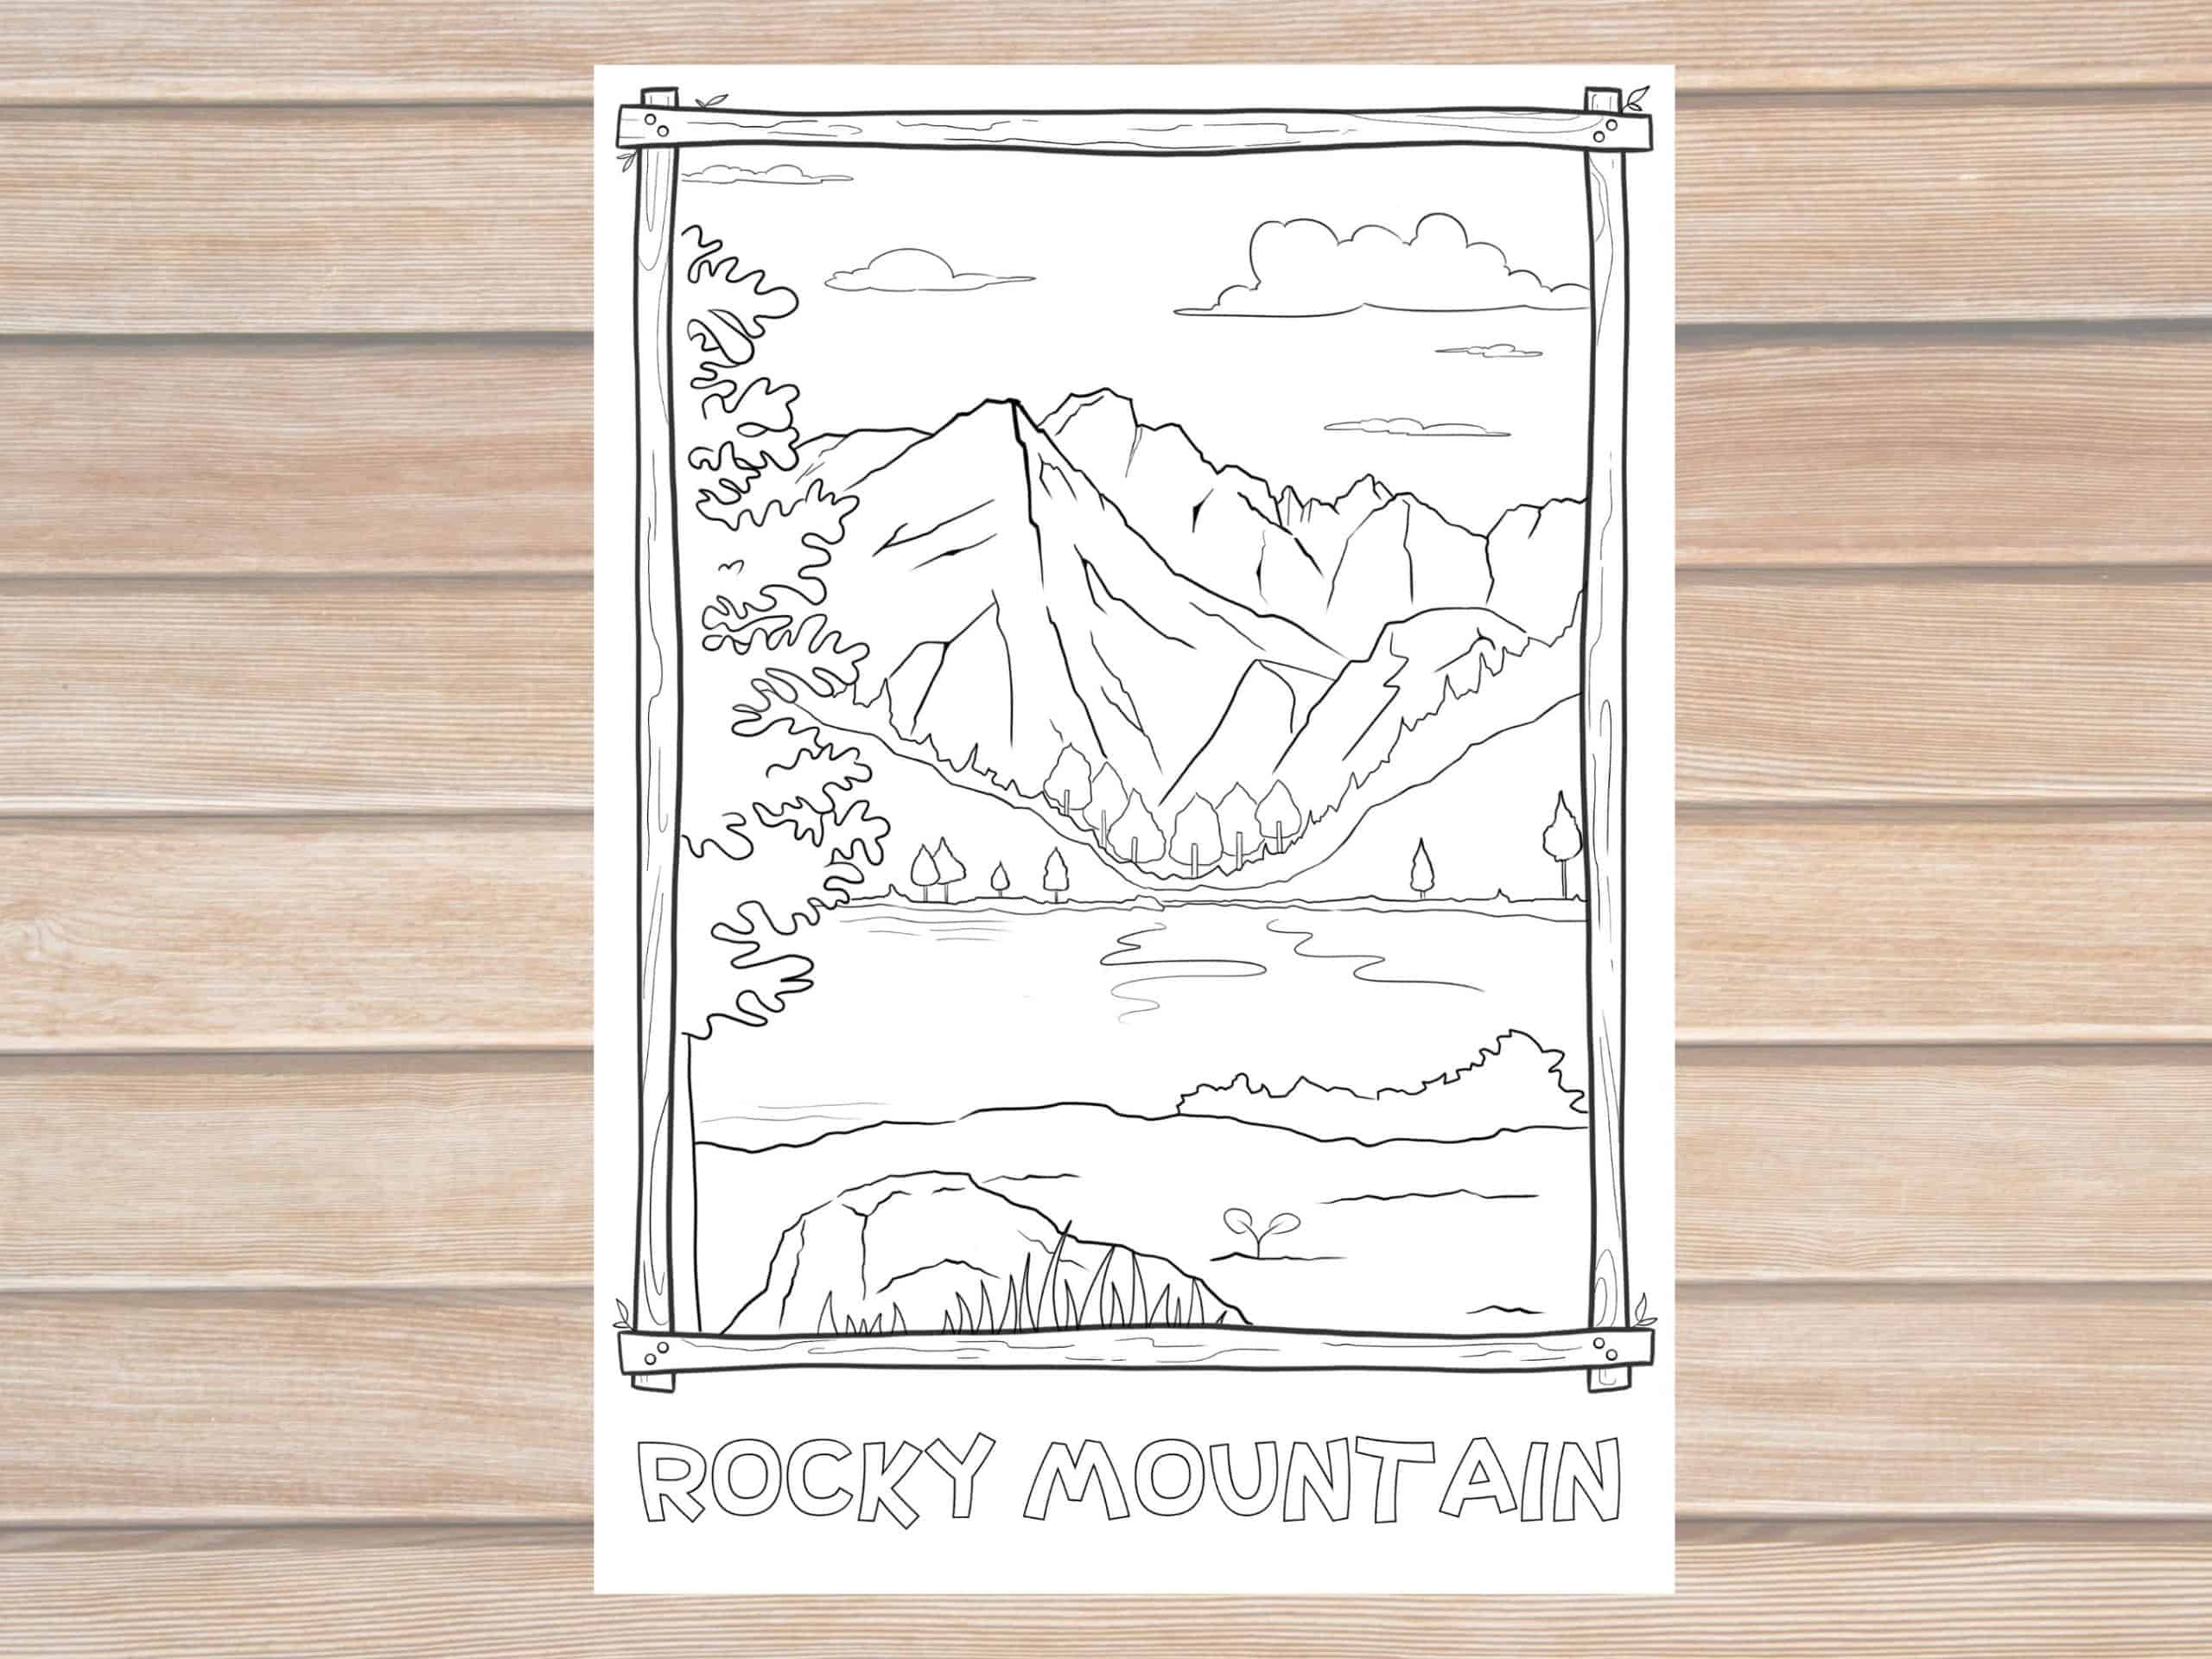 Rocky mountain national park coloring page printable